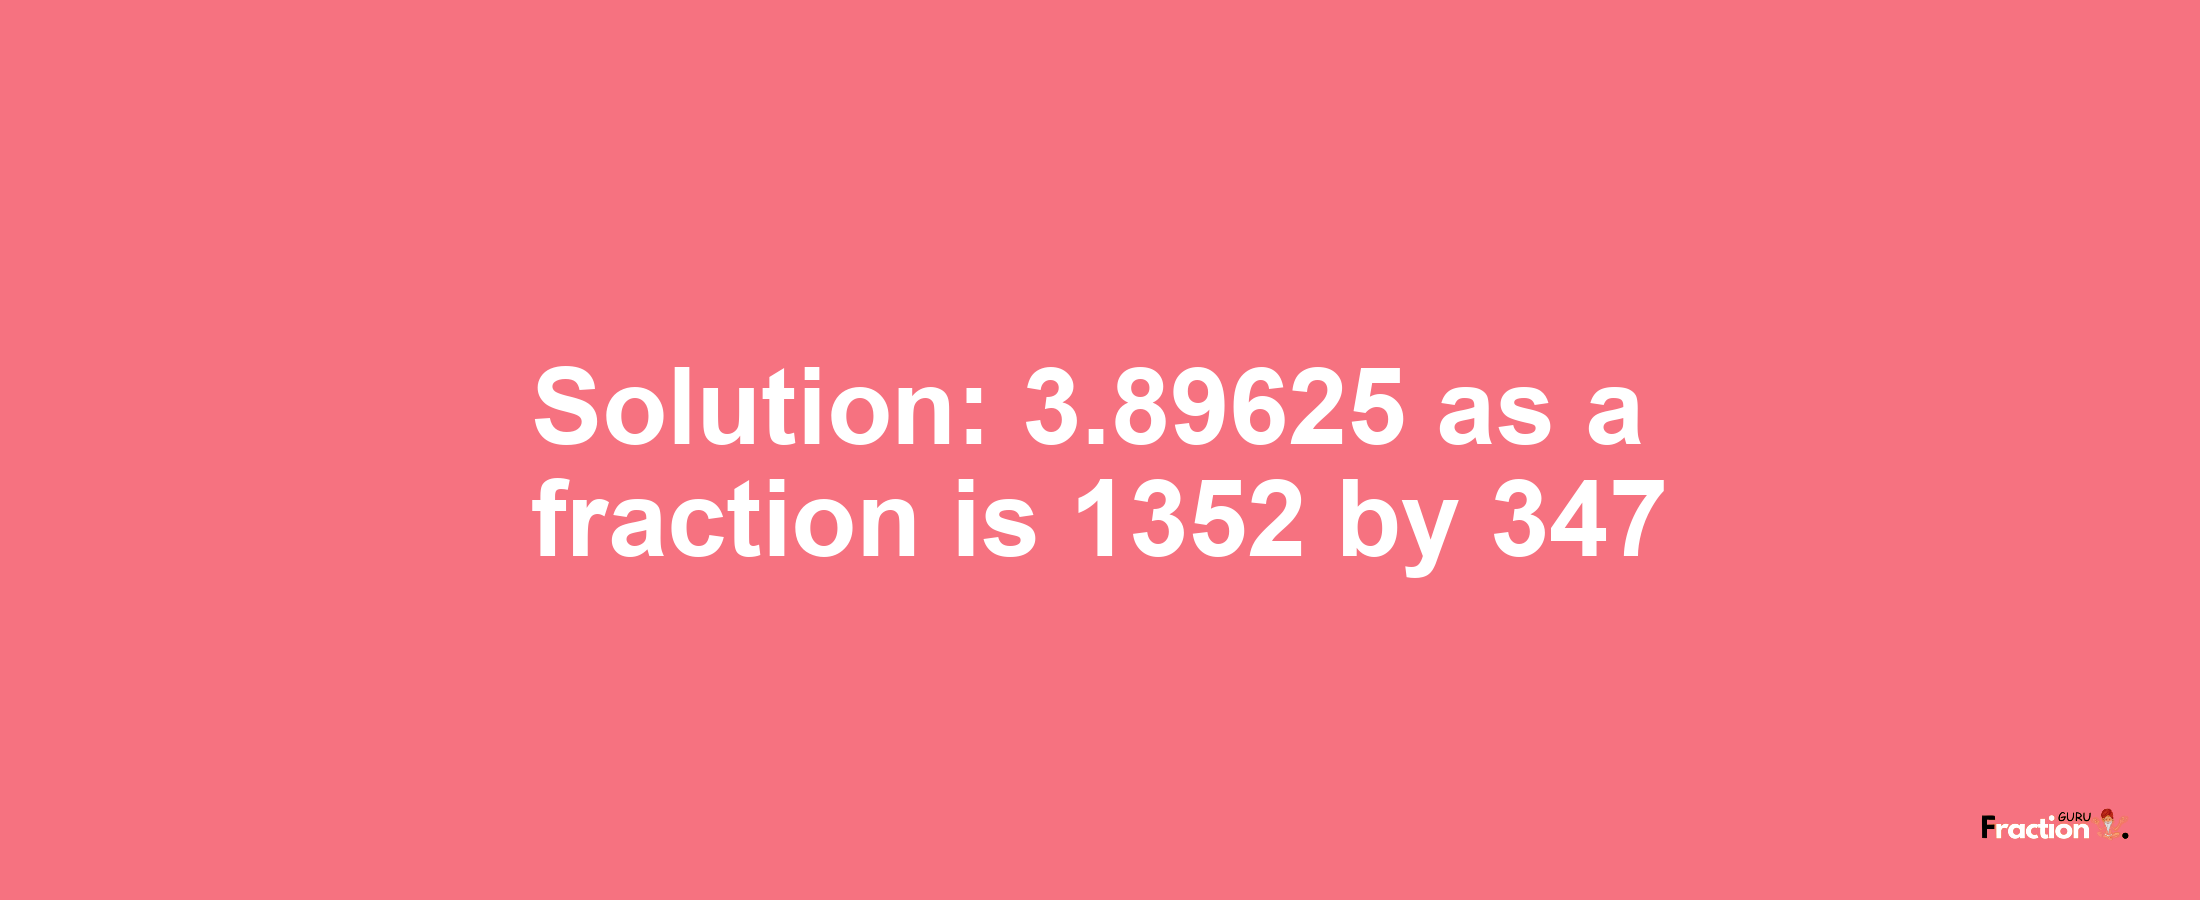 Solution:3.89625 as a fraction is 1352/347